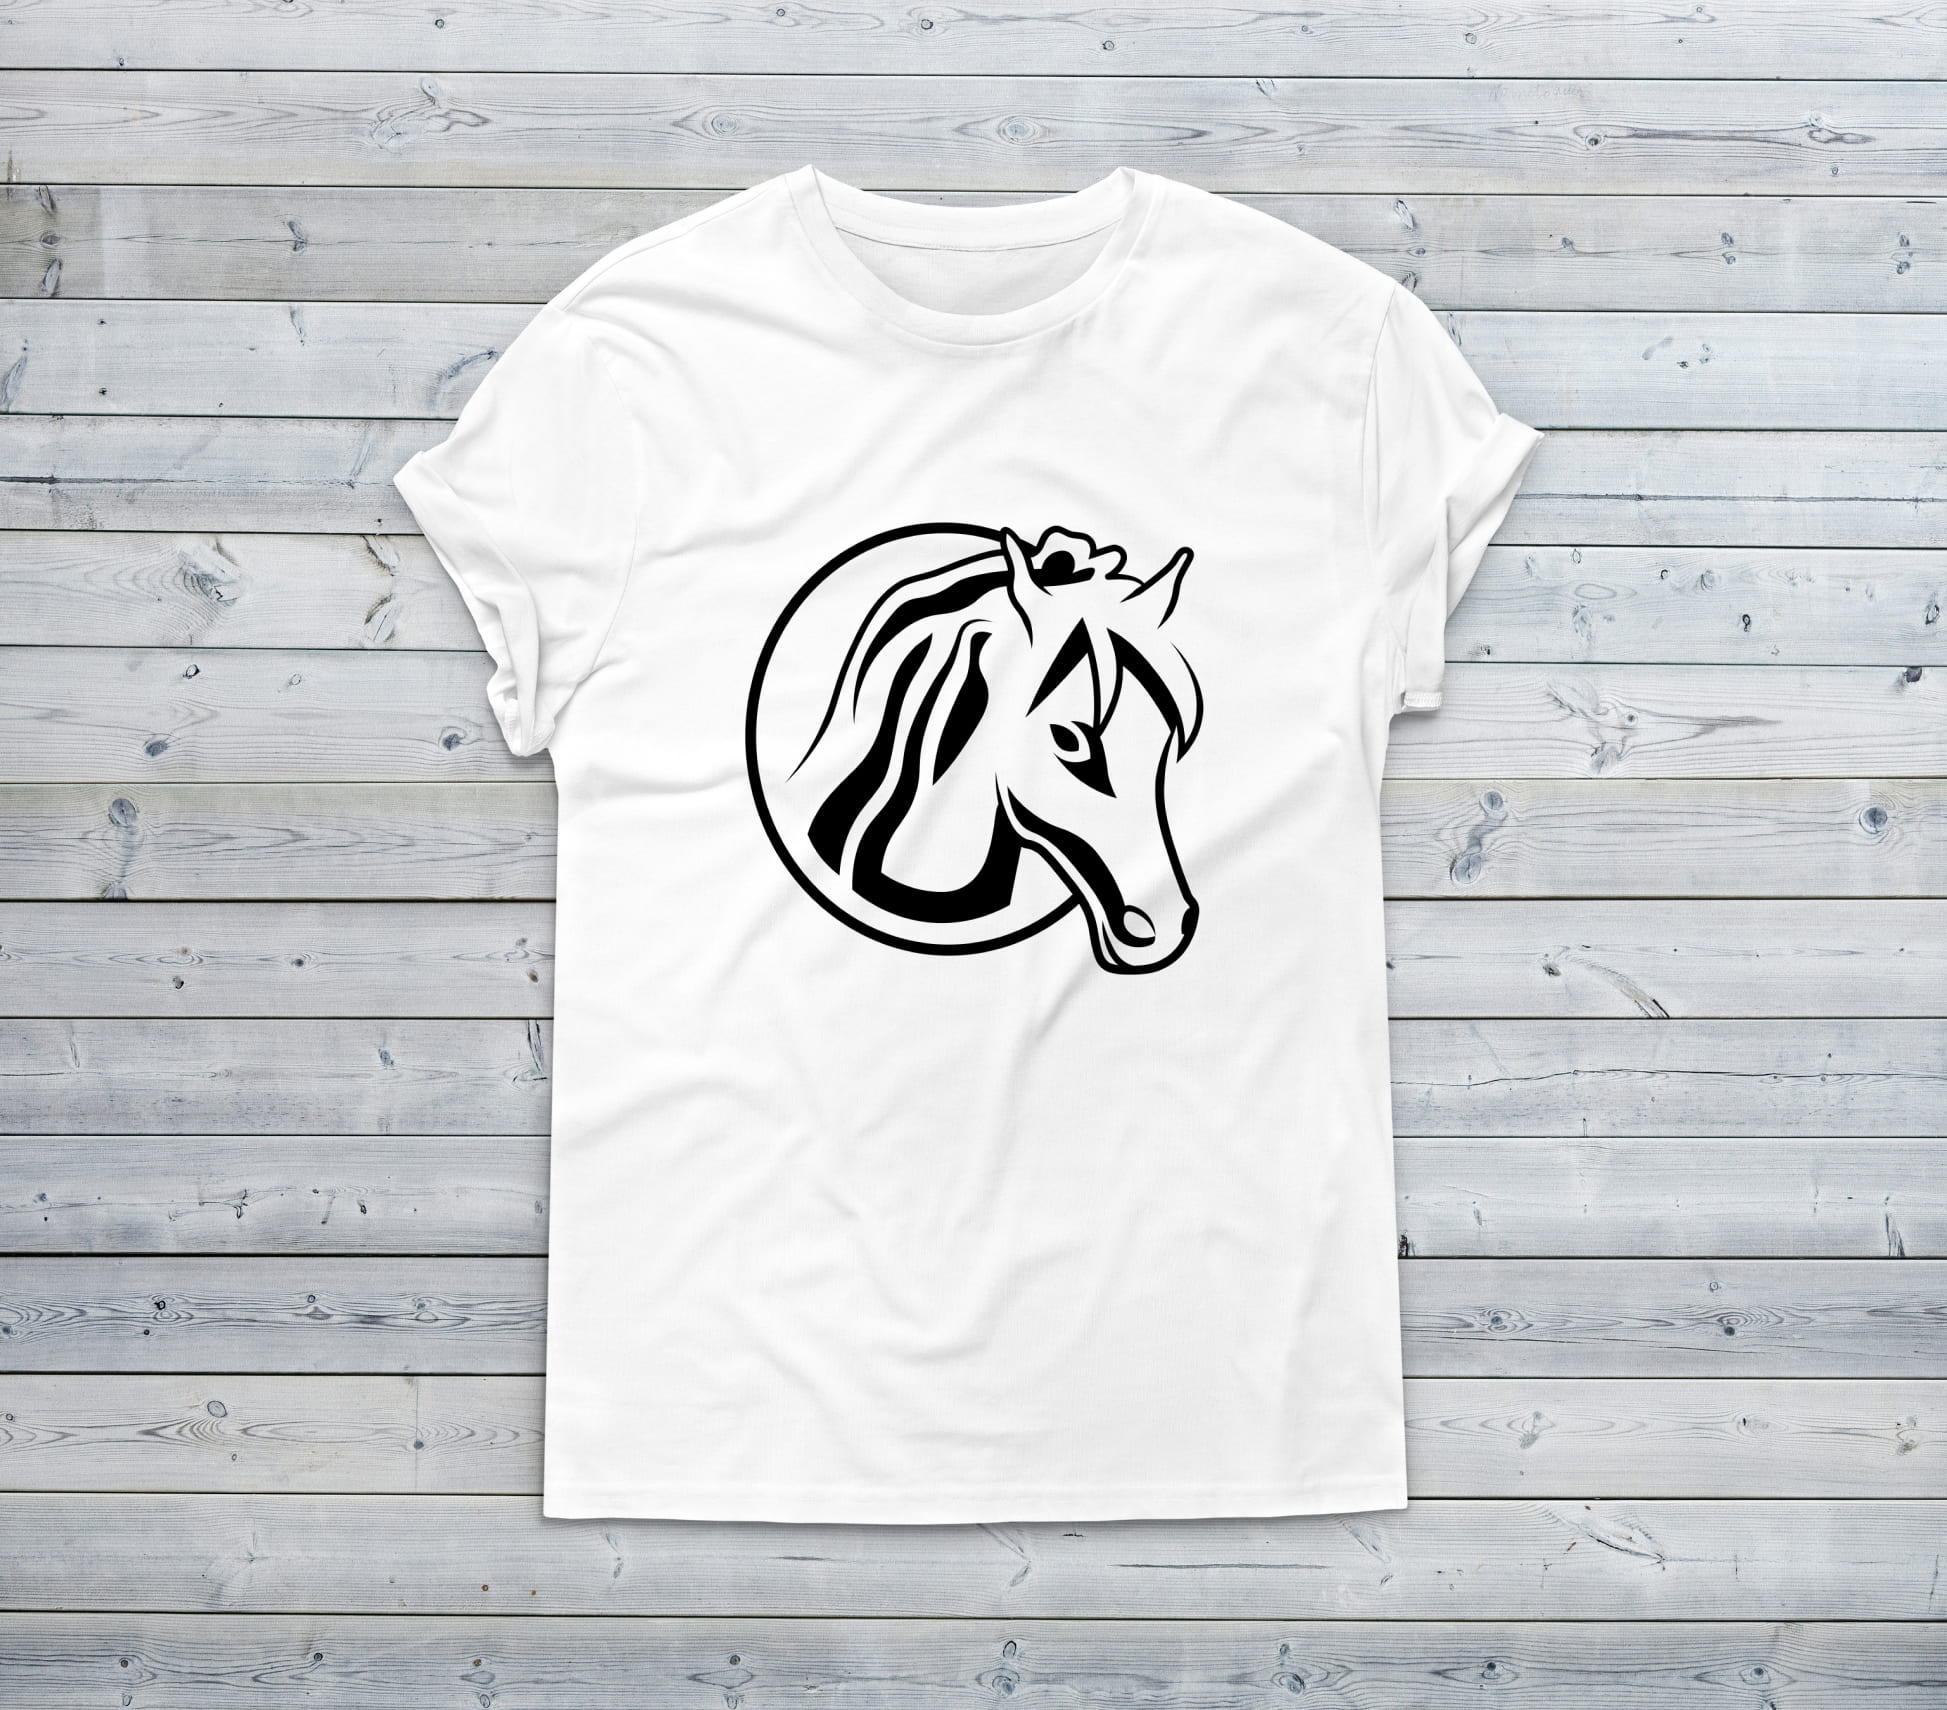 White t-shirt with a black and white horse head on a wooden background.